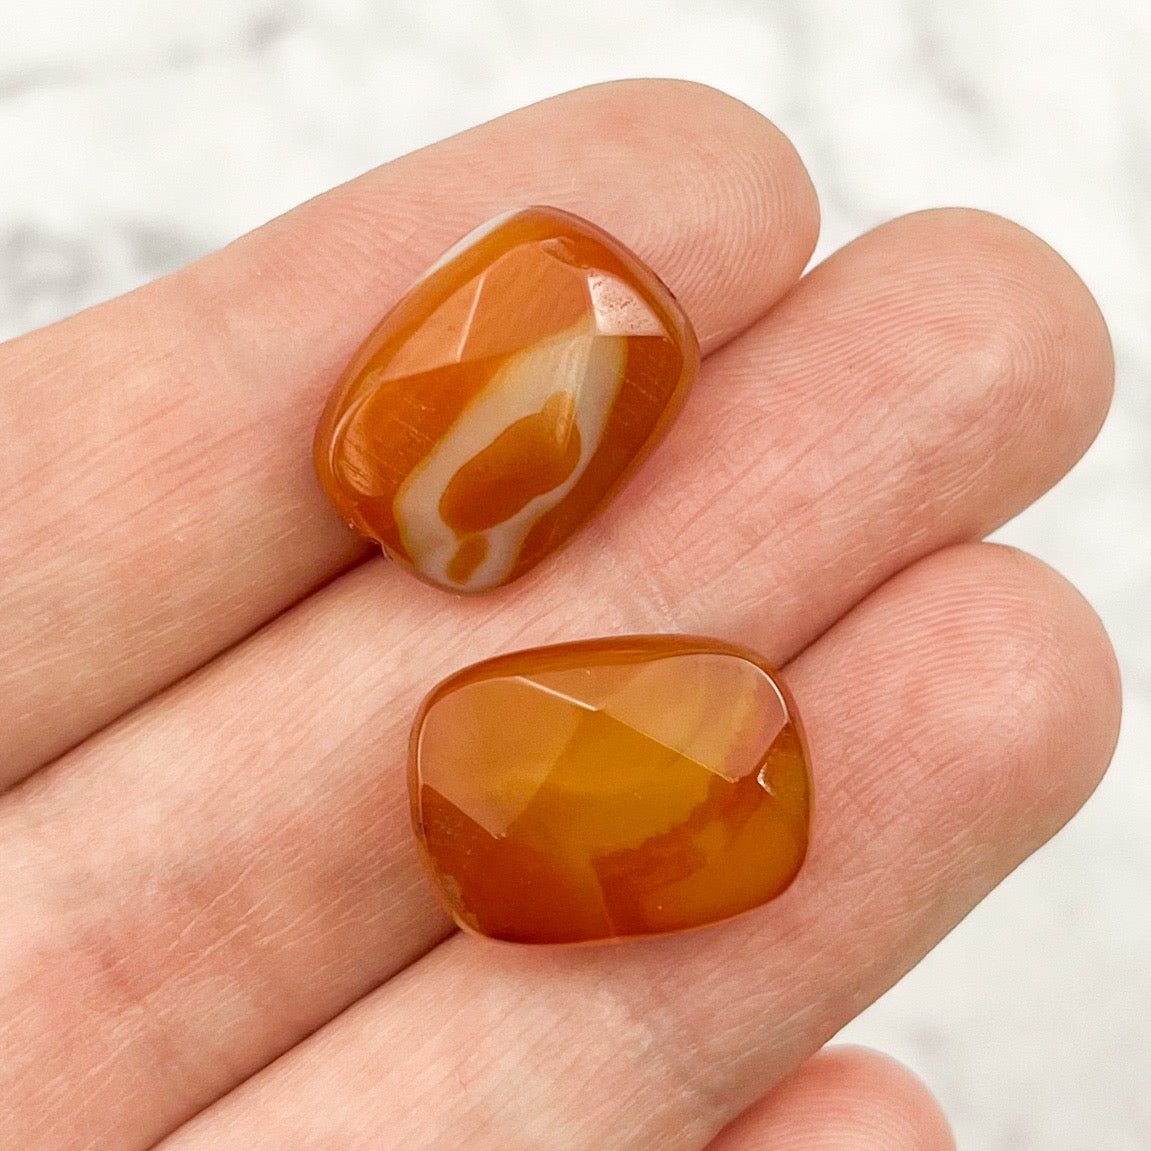 17mm x 12mm Carnelian Rectangle Faceted Focal Bead Pack (2 Beads)